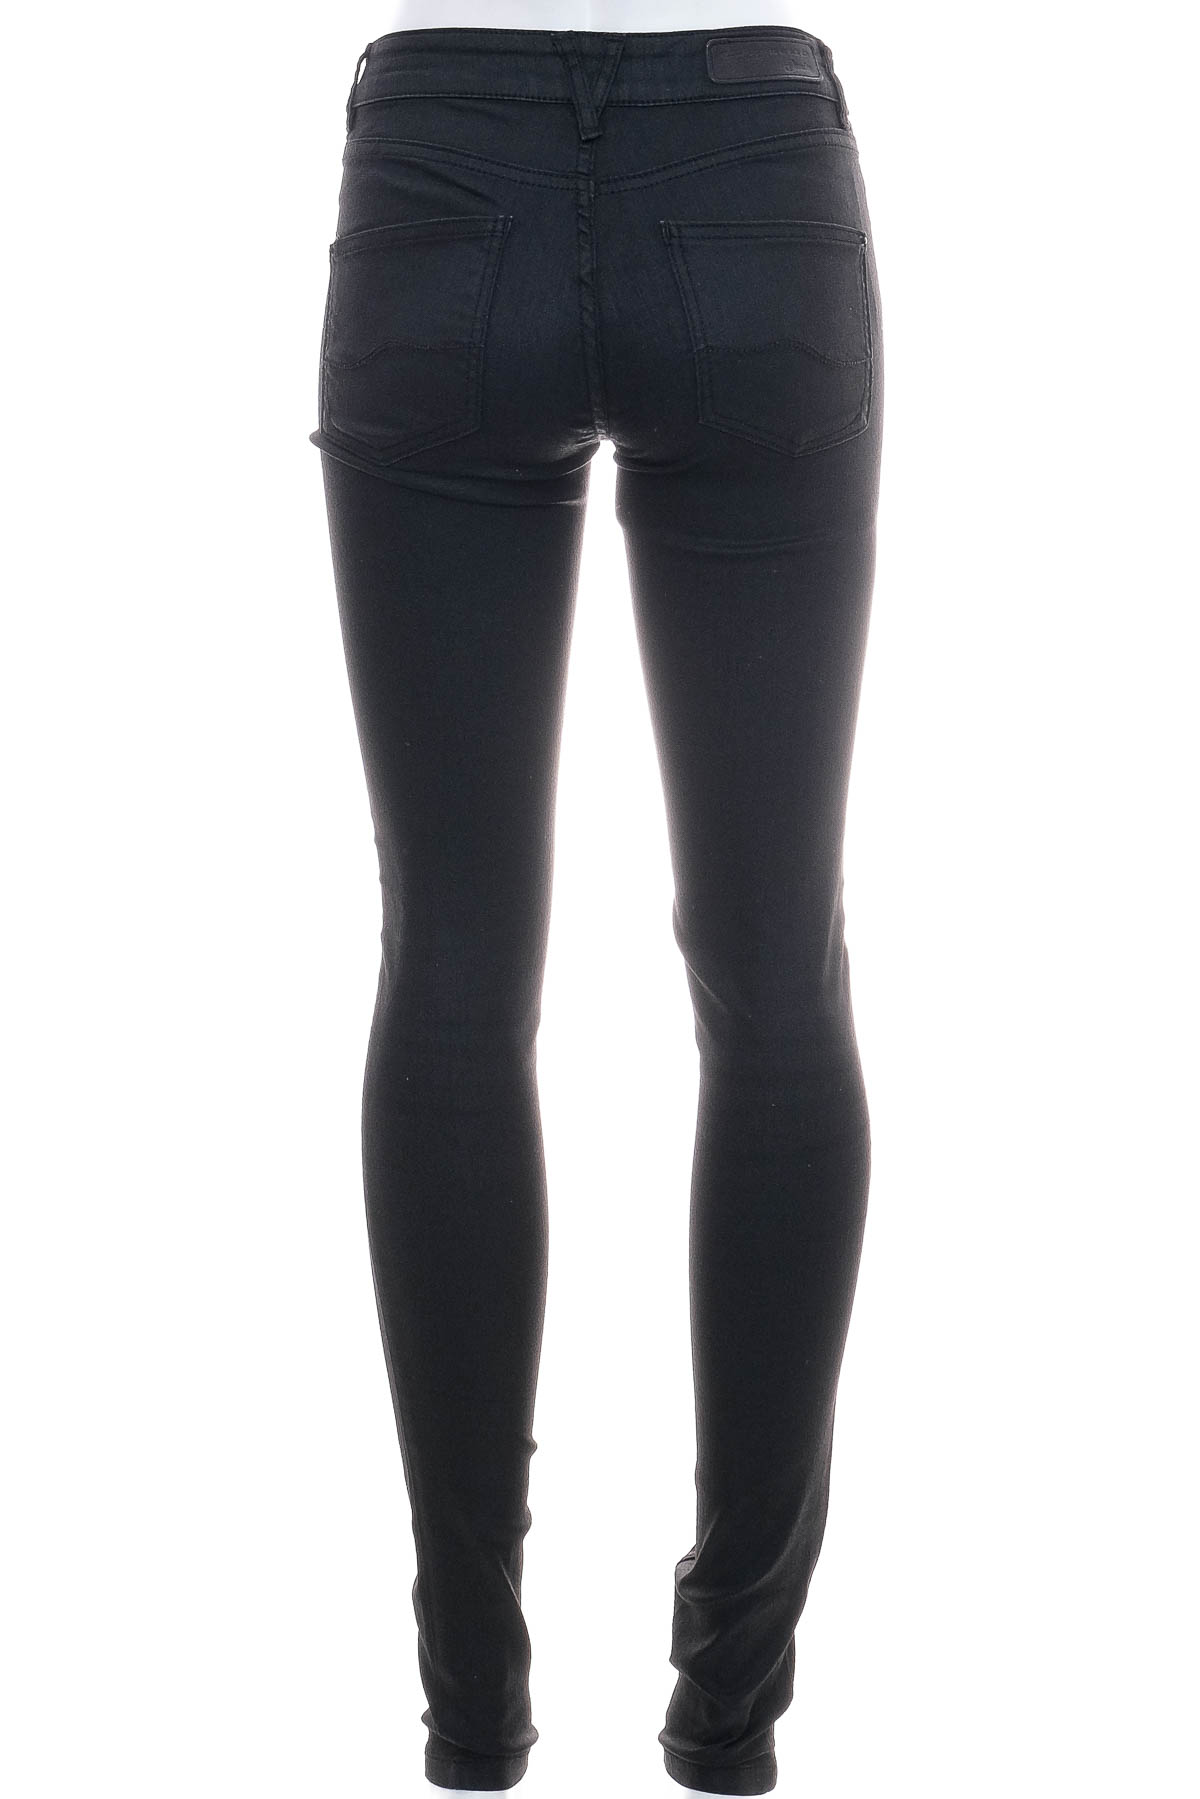 Women's trousers - Expresso - 1